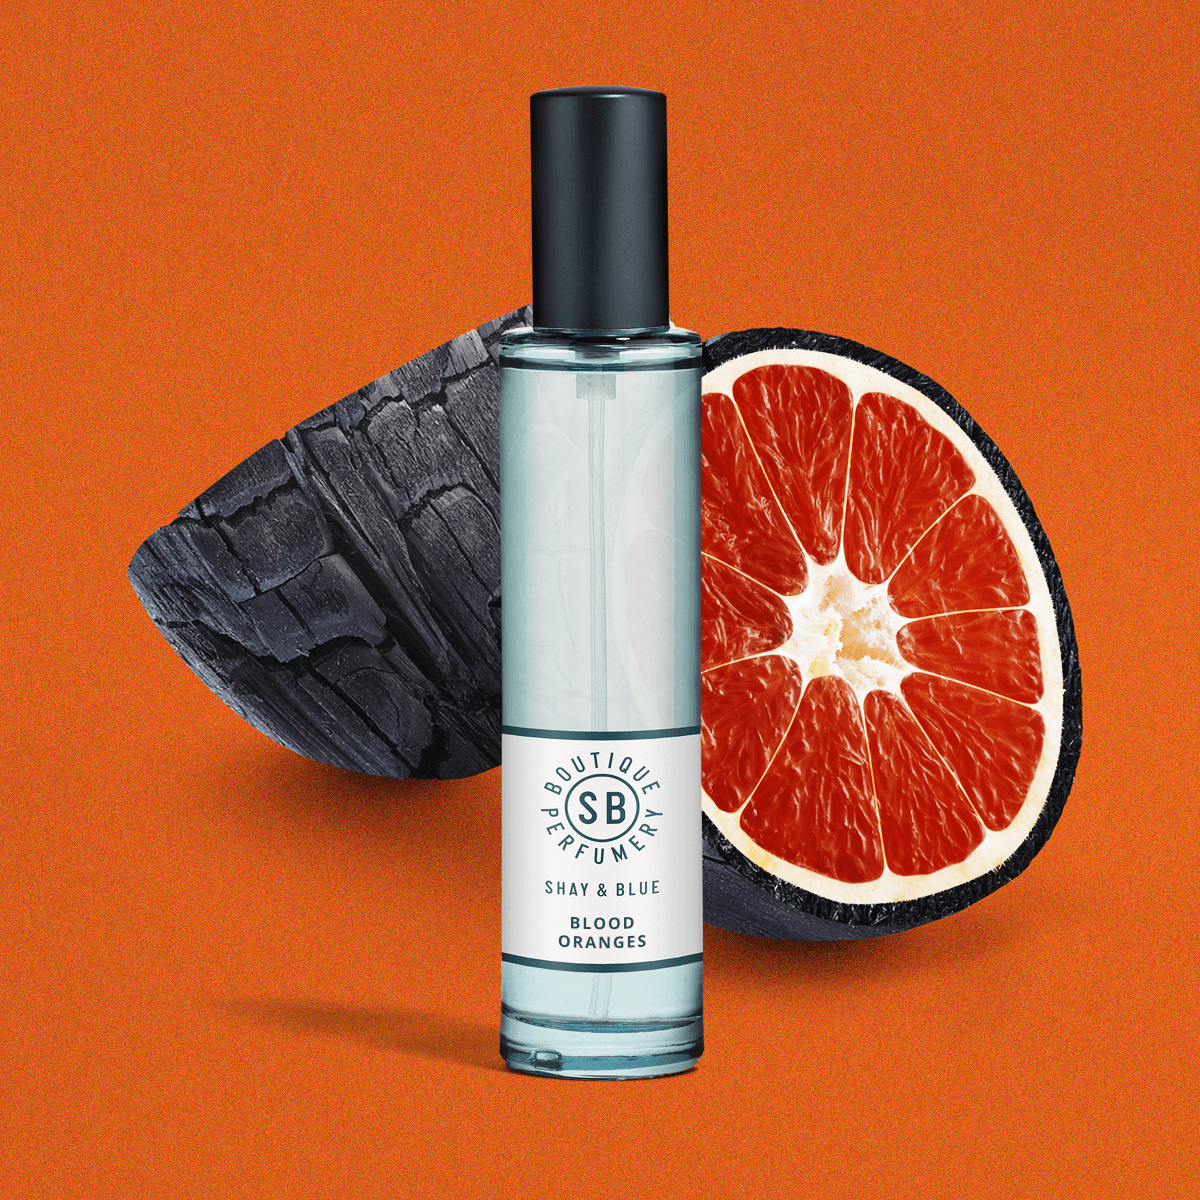 Blood Oranges Fragrance 30ml | Zesty blood oranges with rich and sensual blend of woods and smoky leather. | Clean All Gender Fragrance | Shay & Blue